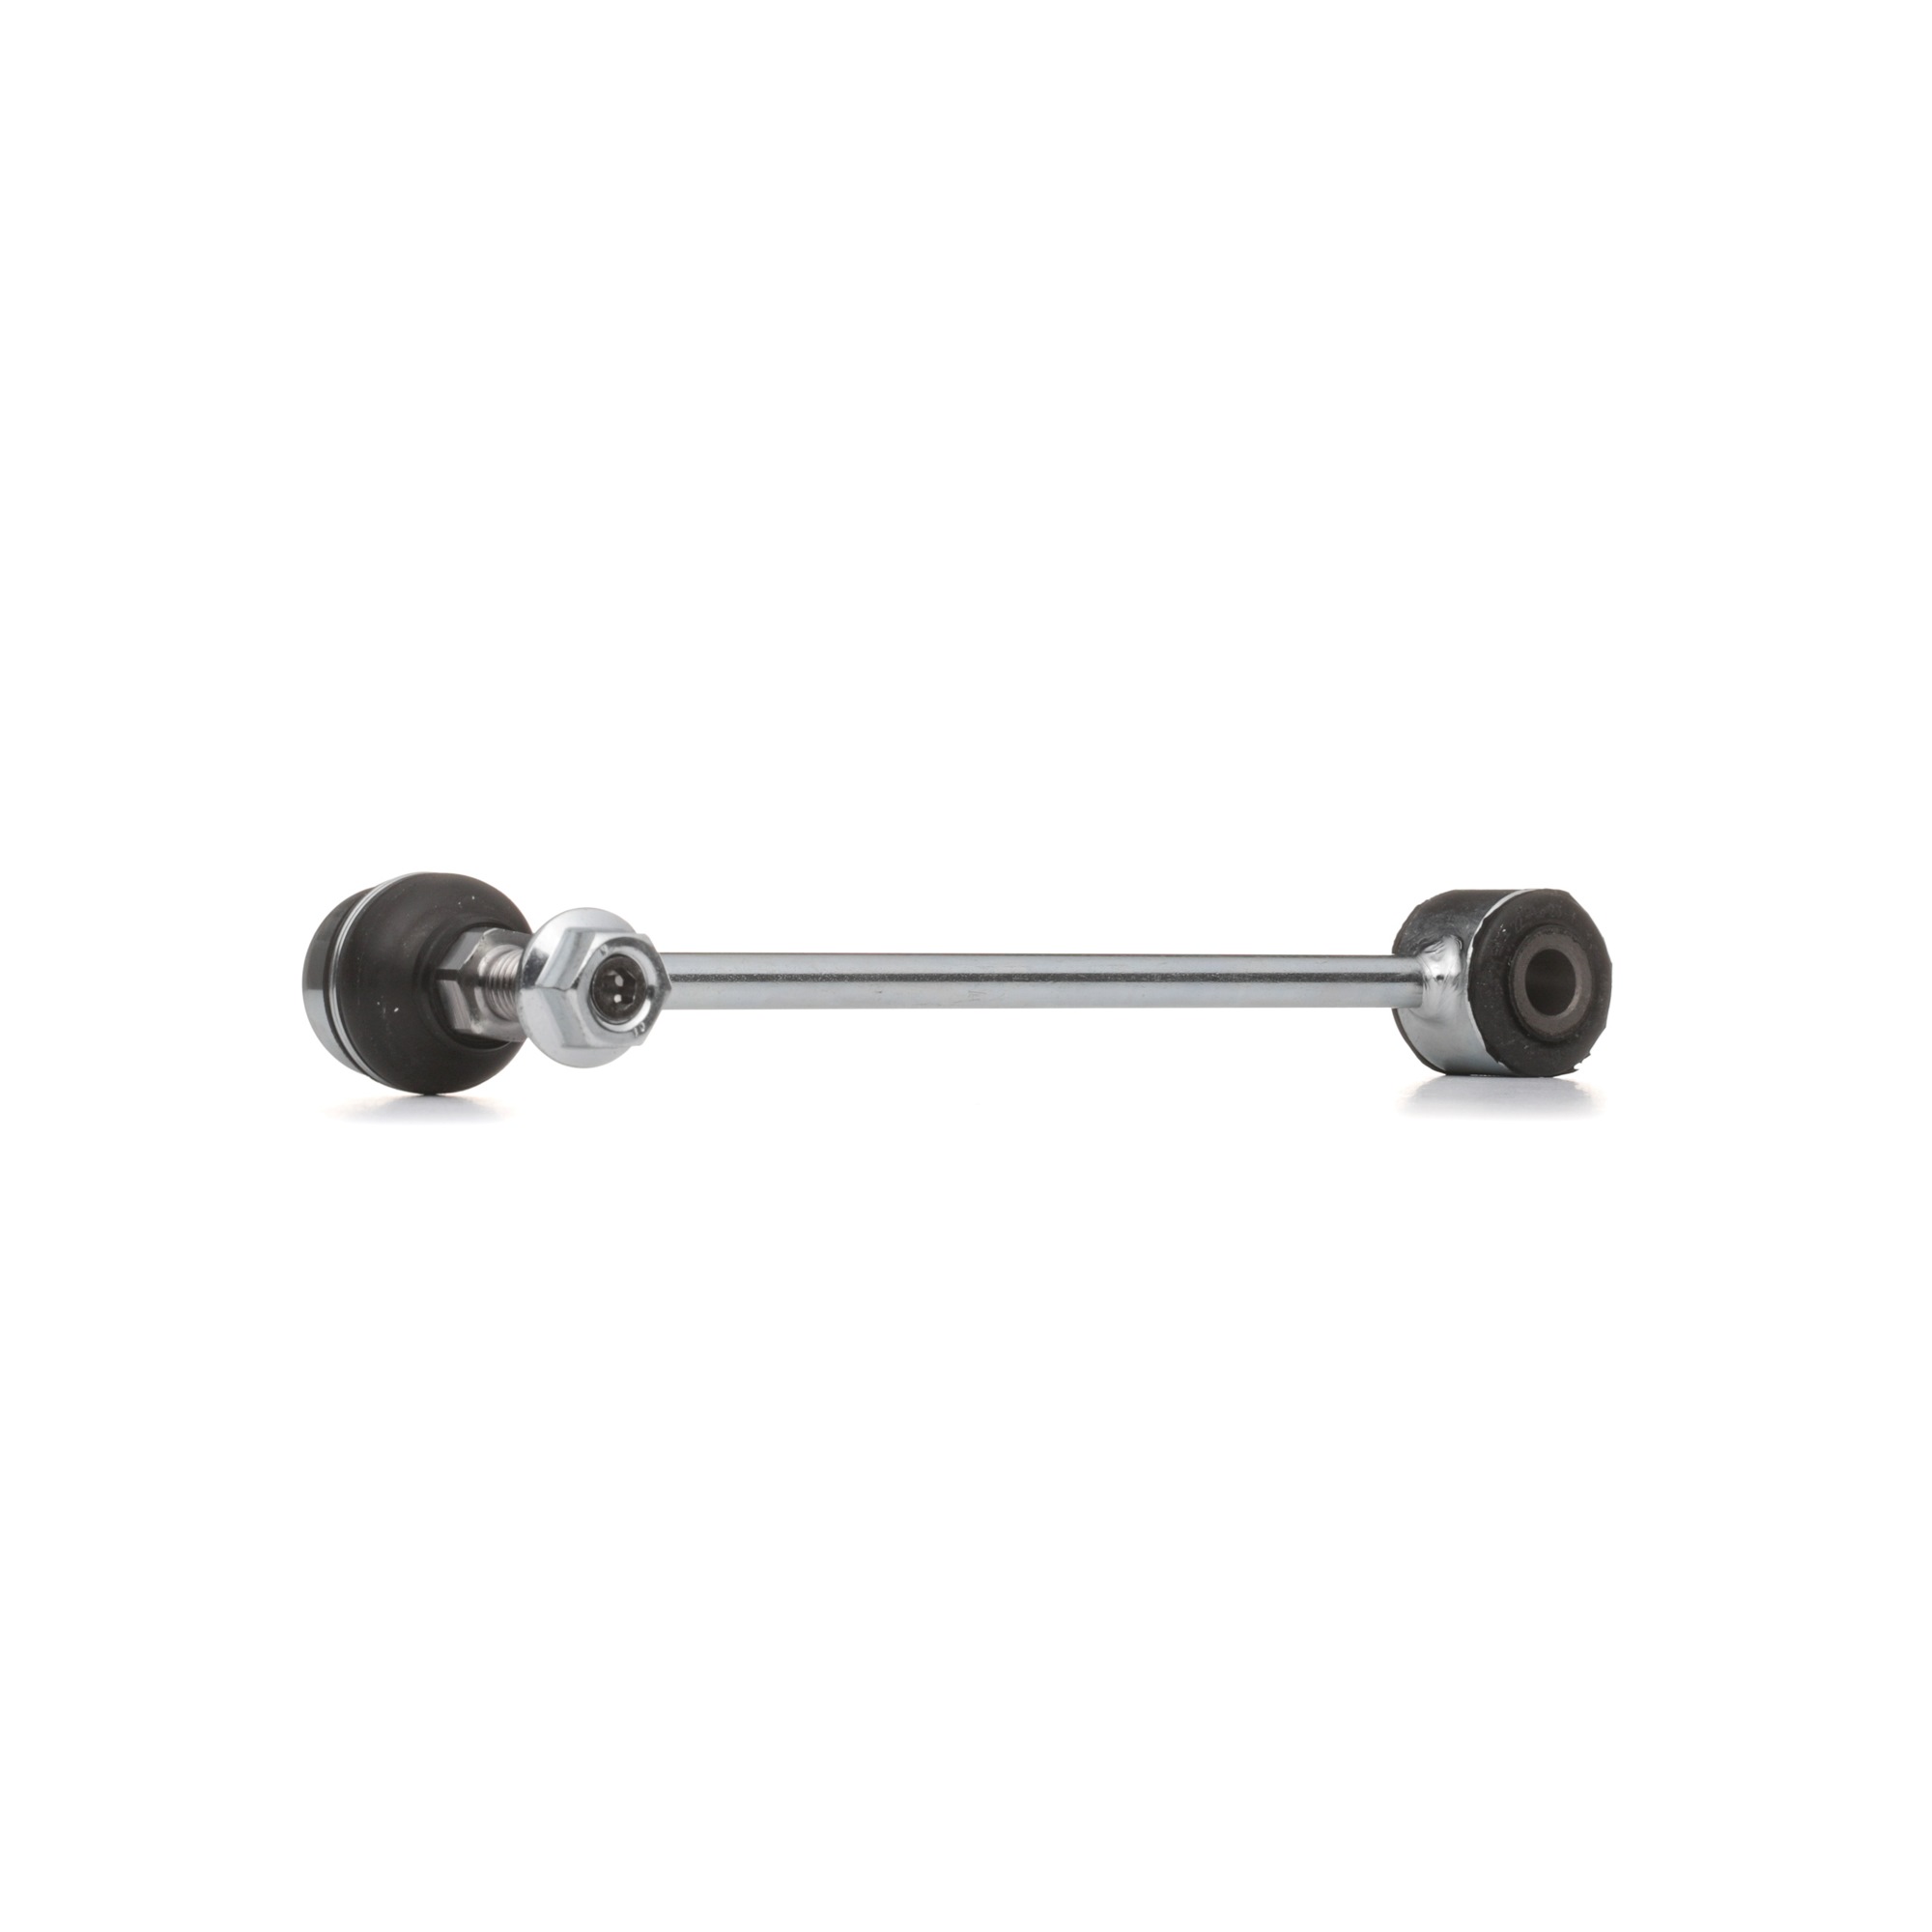 SKF VKDS 442501 Anti-roll bar link 240mm, M12 x 1,75, with synthetic grease